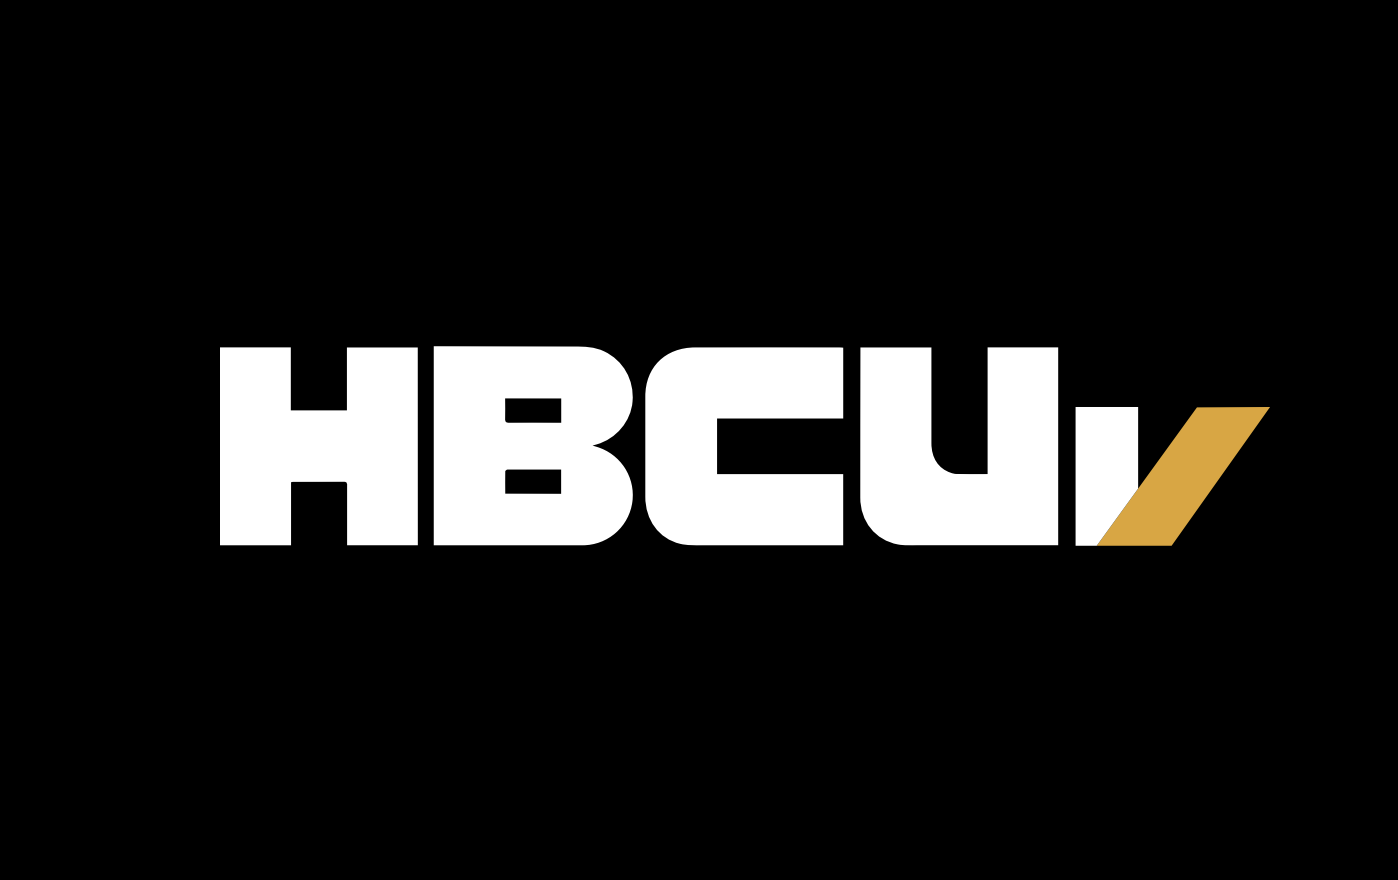 Our Village, Our Digital Innovation: HBCUv